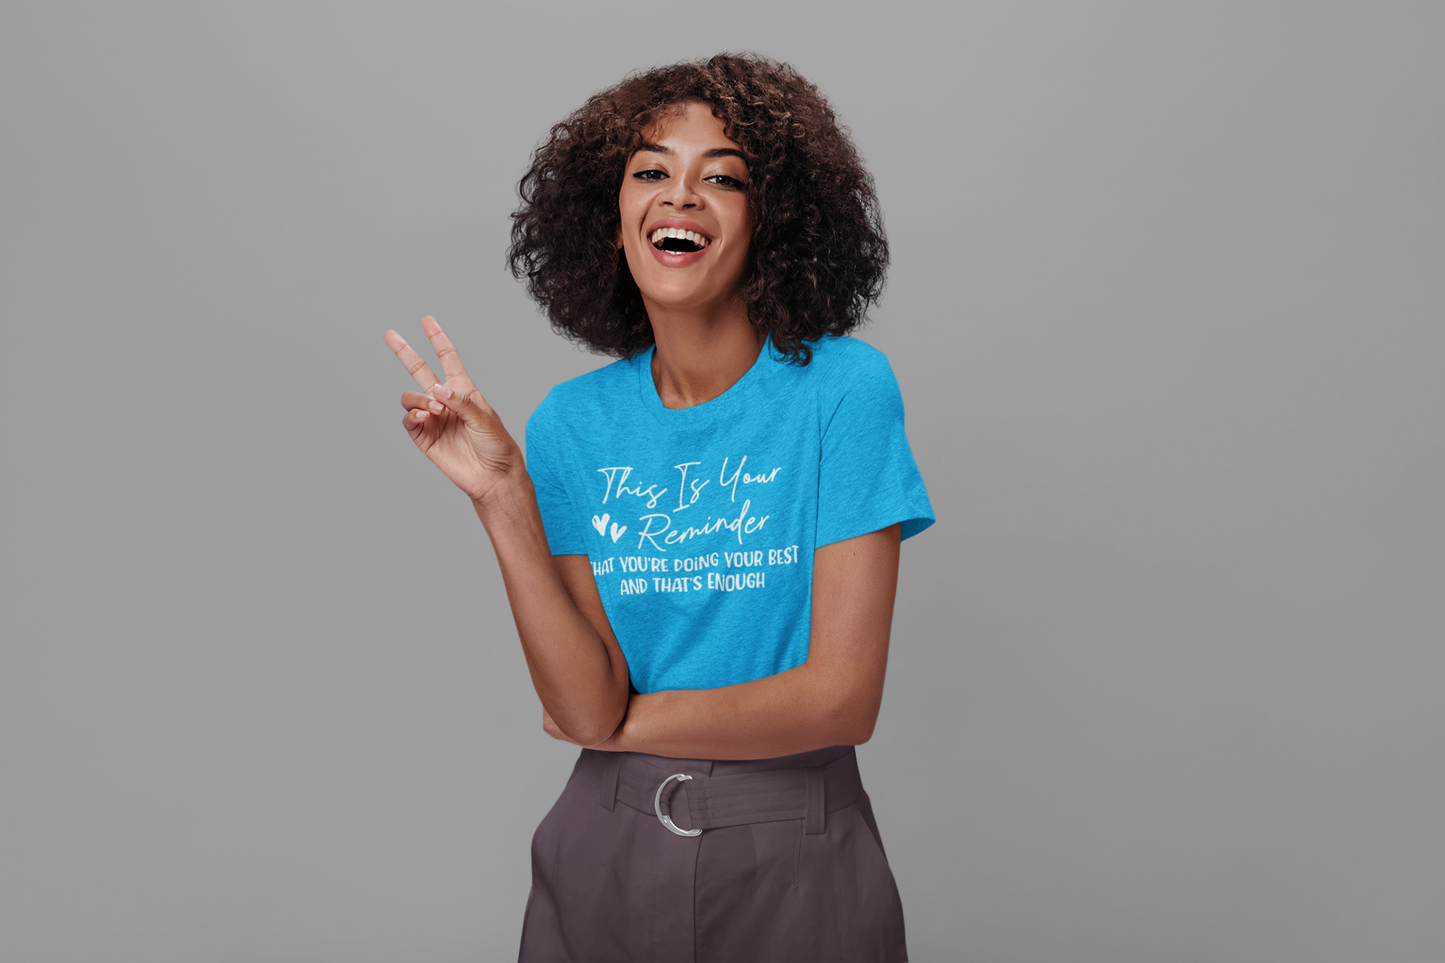 A woman wearing the "This is Your Reminder that You're Doing Your Best and That's Enough Tee (heart)" by Sharp Tact Kreativ | Tees & Gifts with Encouraging Messages to Brighten Your Day with a Bit of Wit posing for the camera.